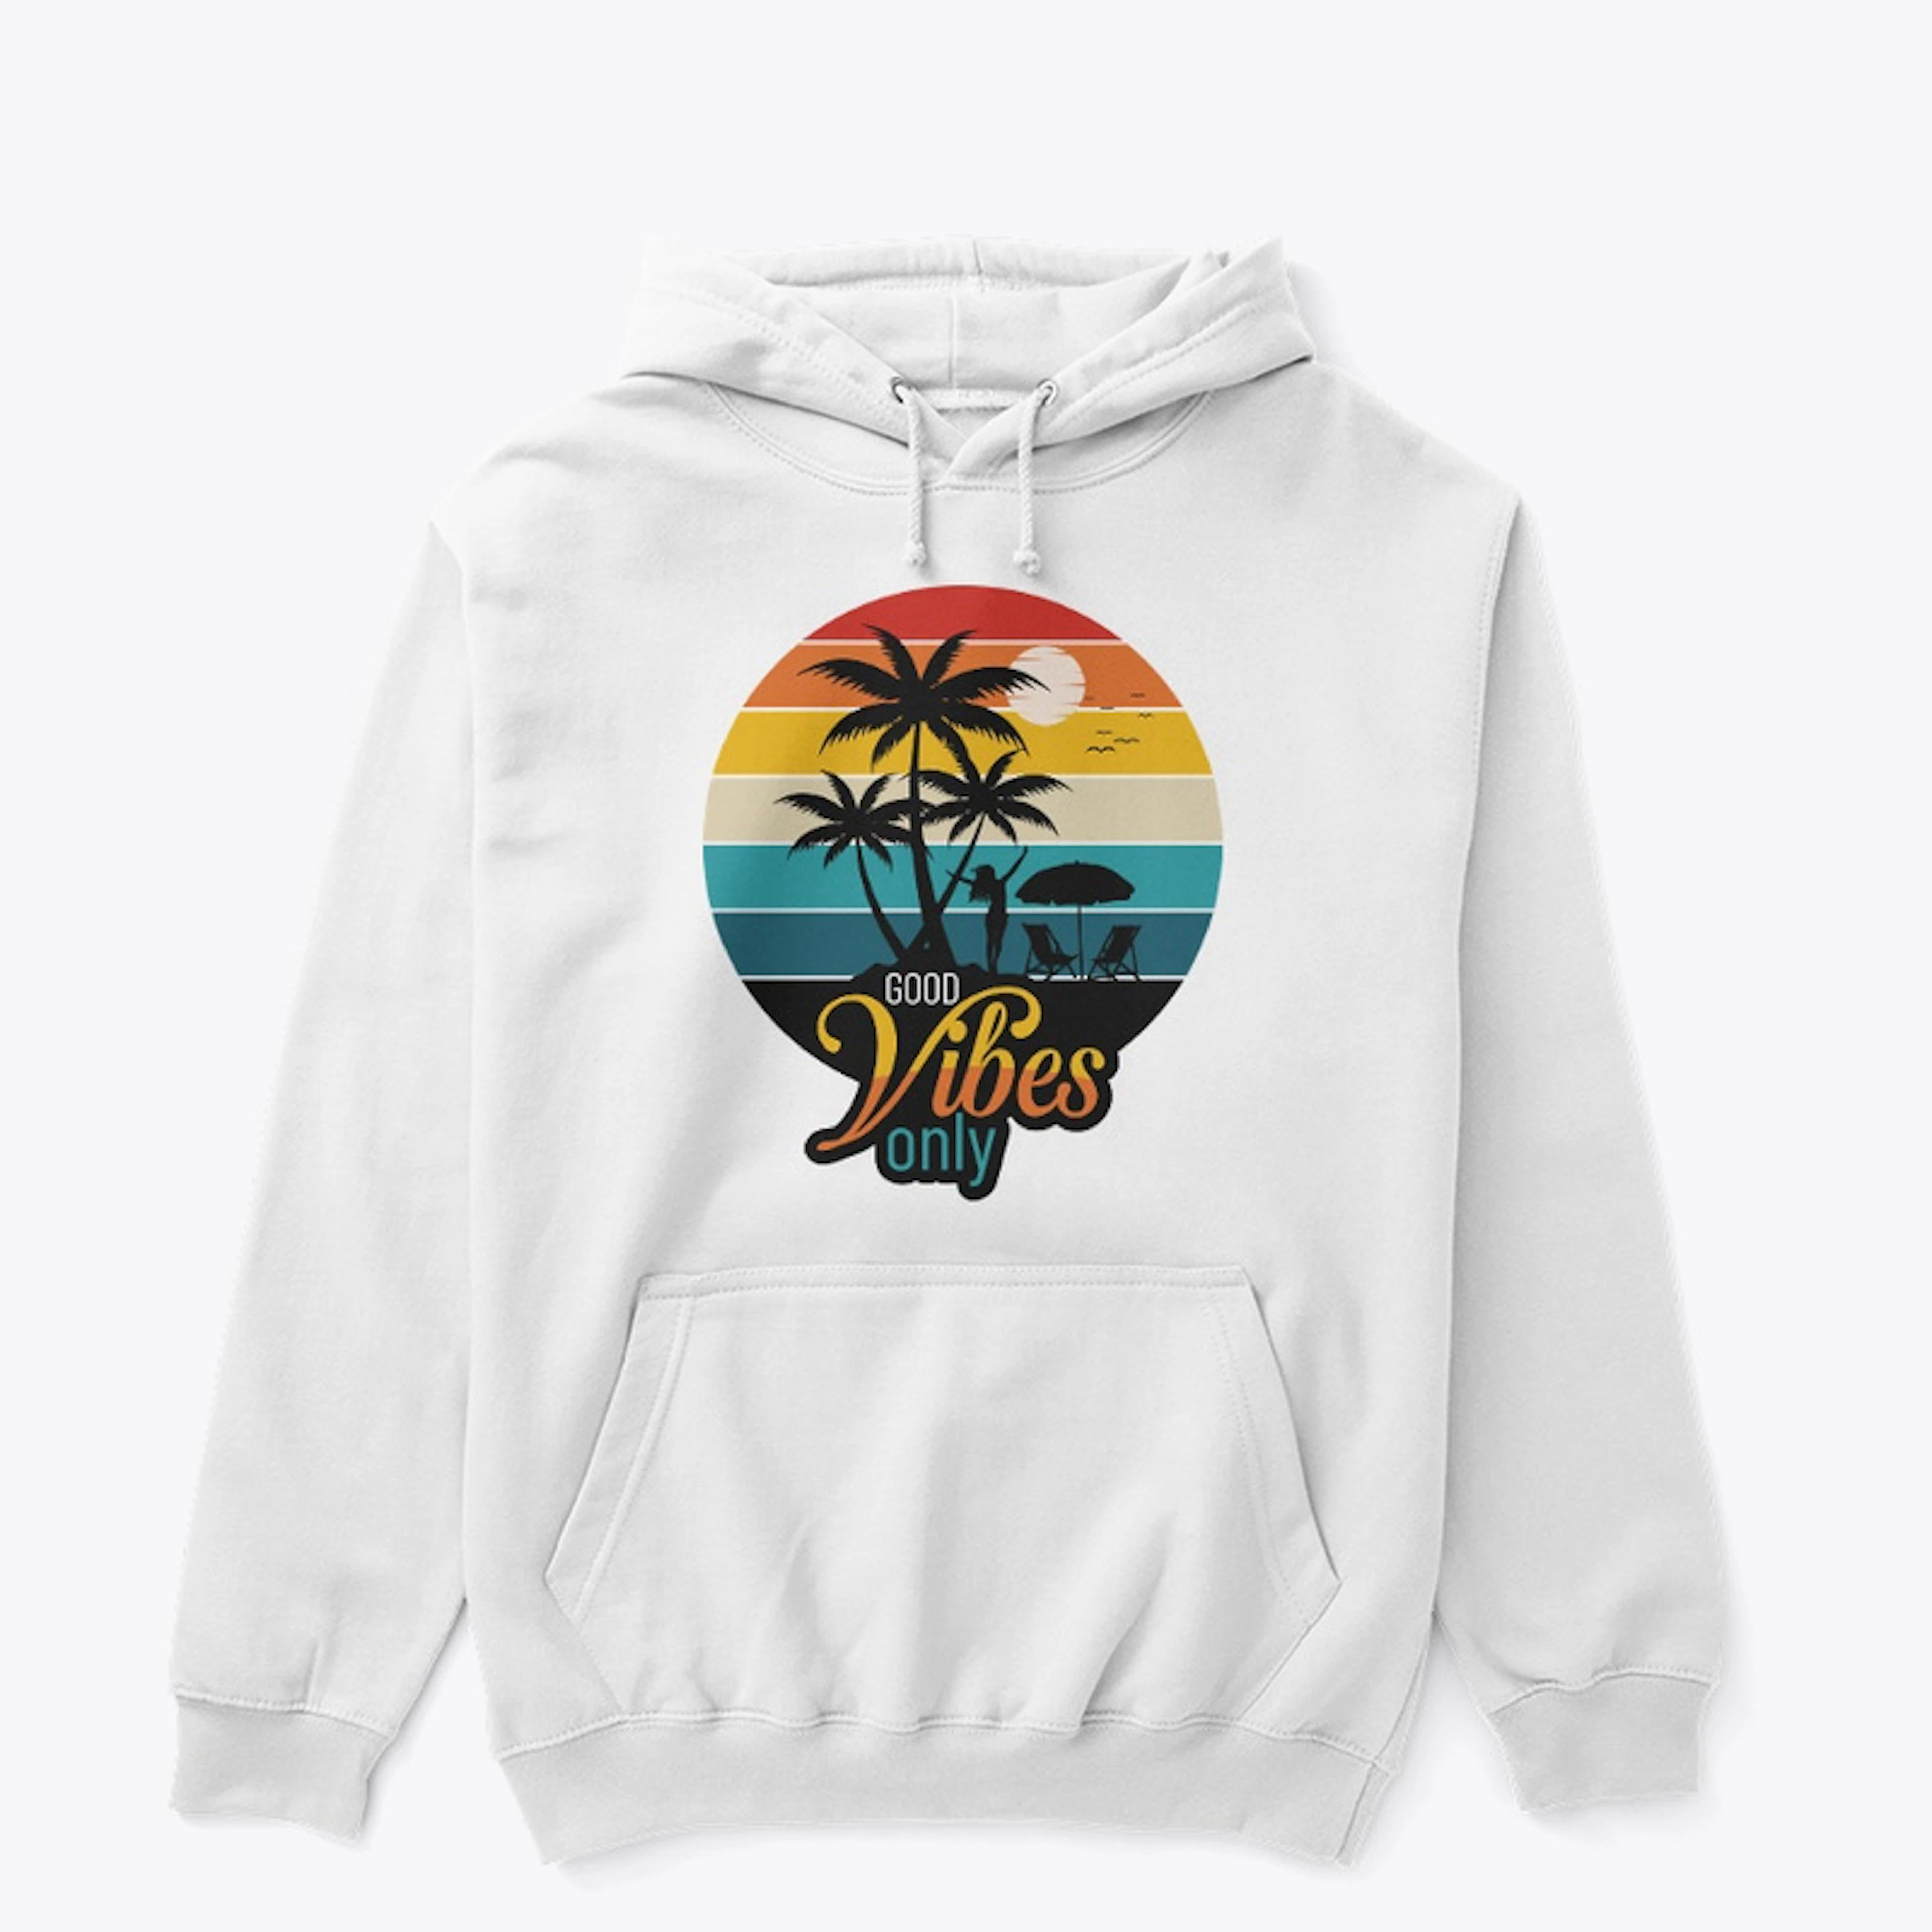 Good vibes collection